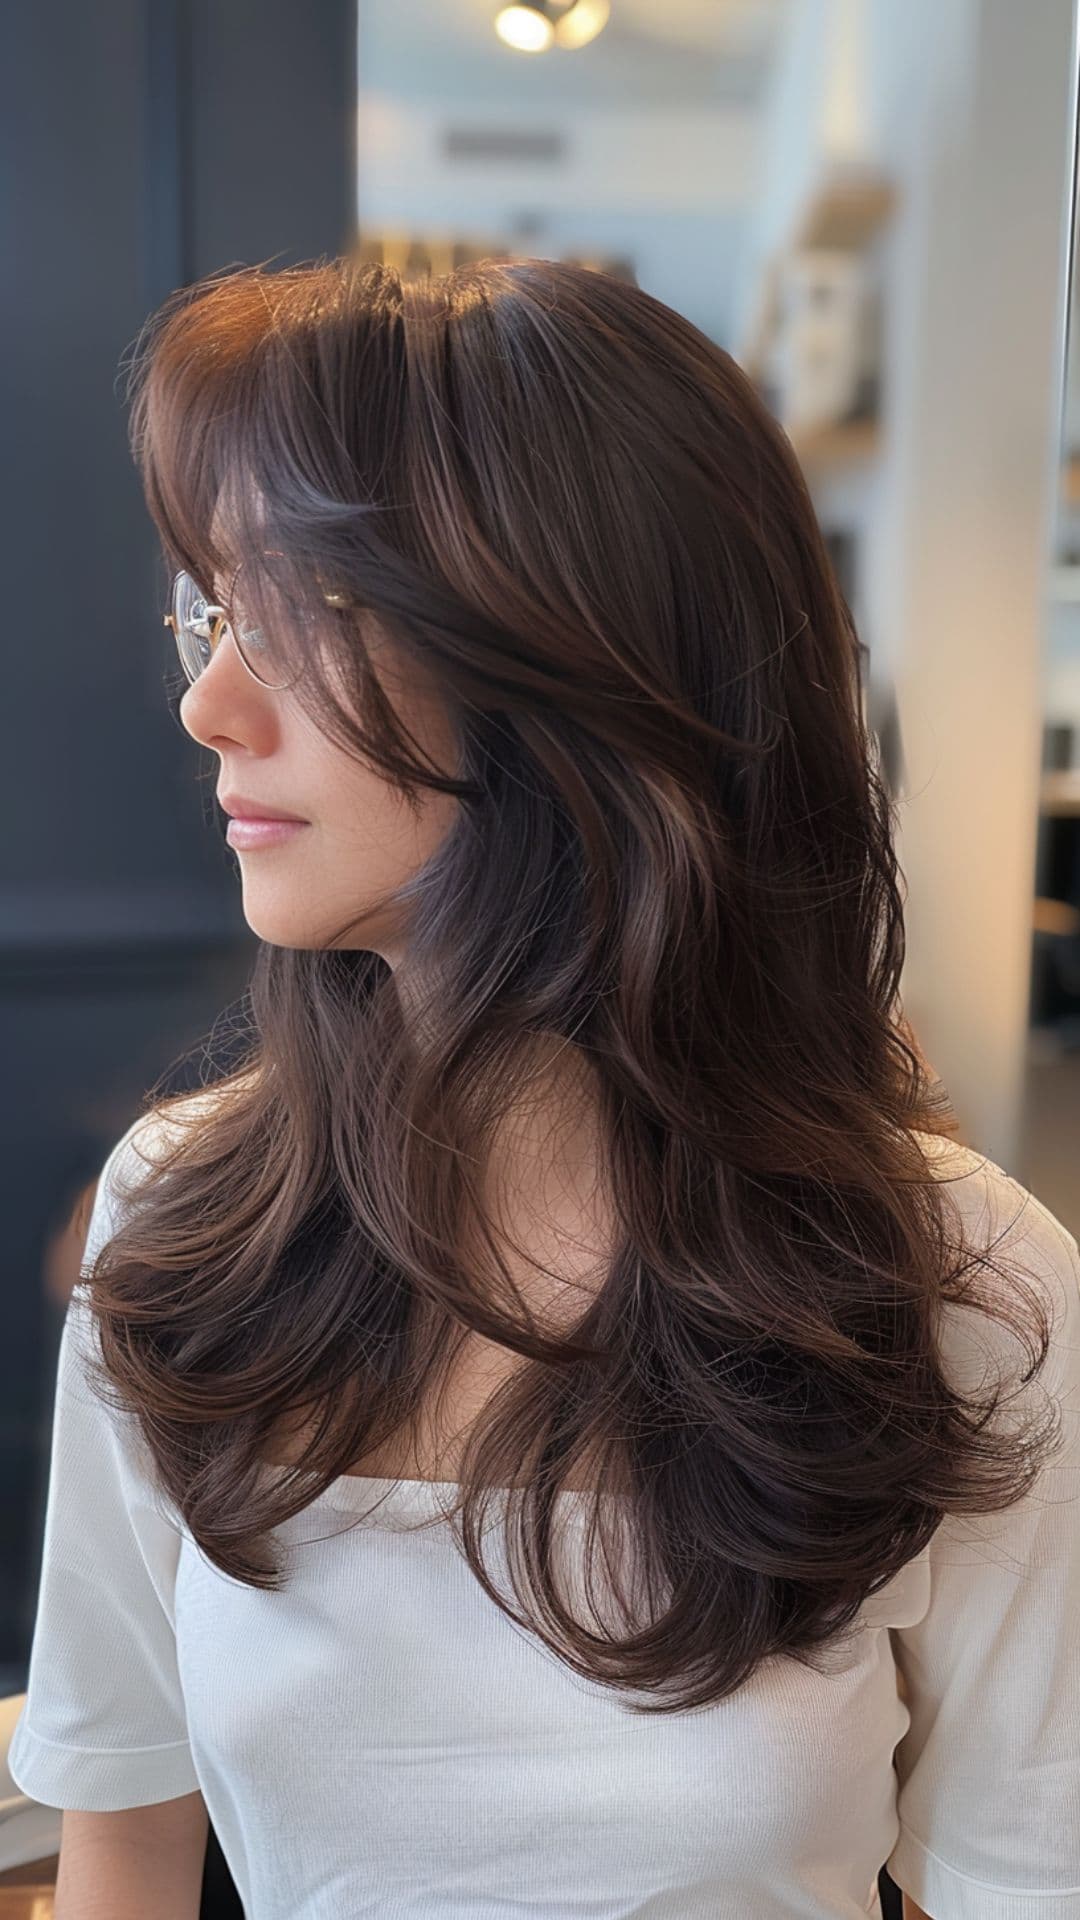 A woman wearing eyeglasses modelling a long hair with side bangs.